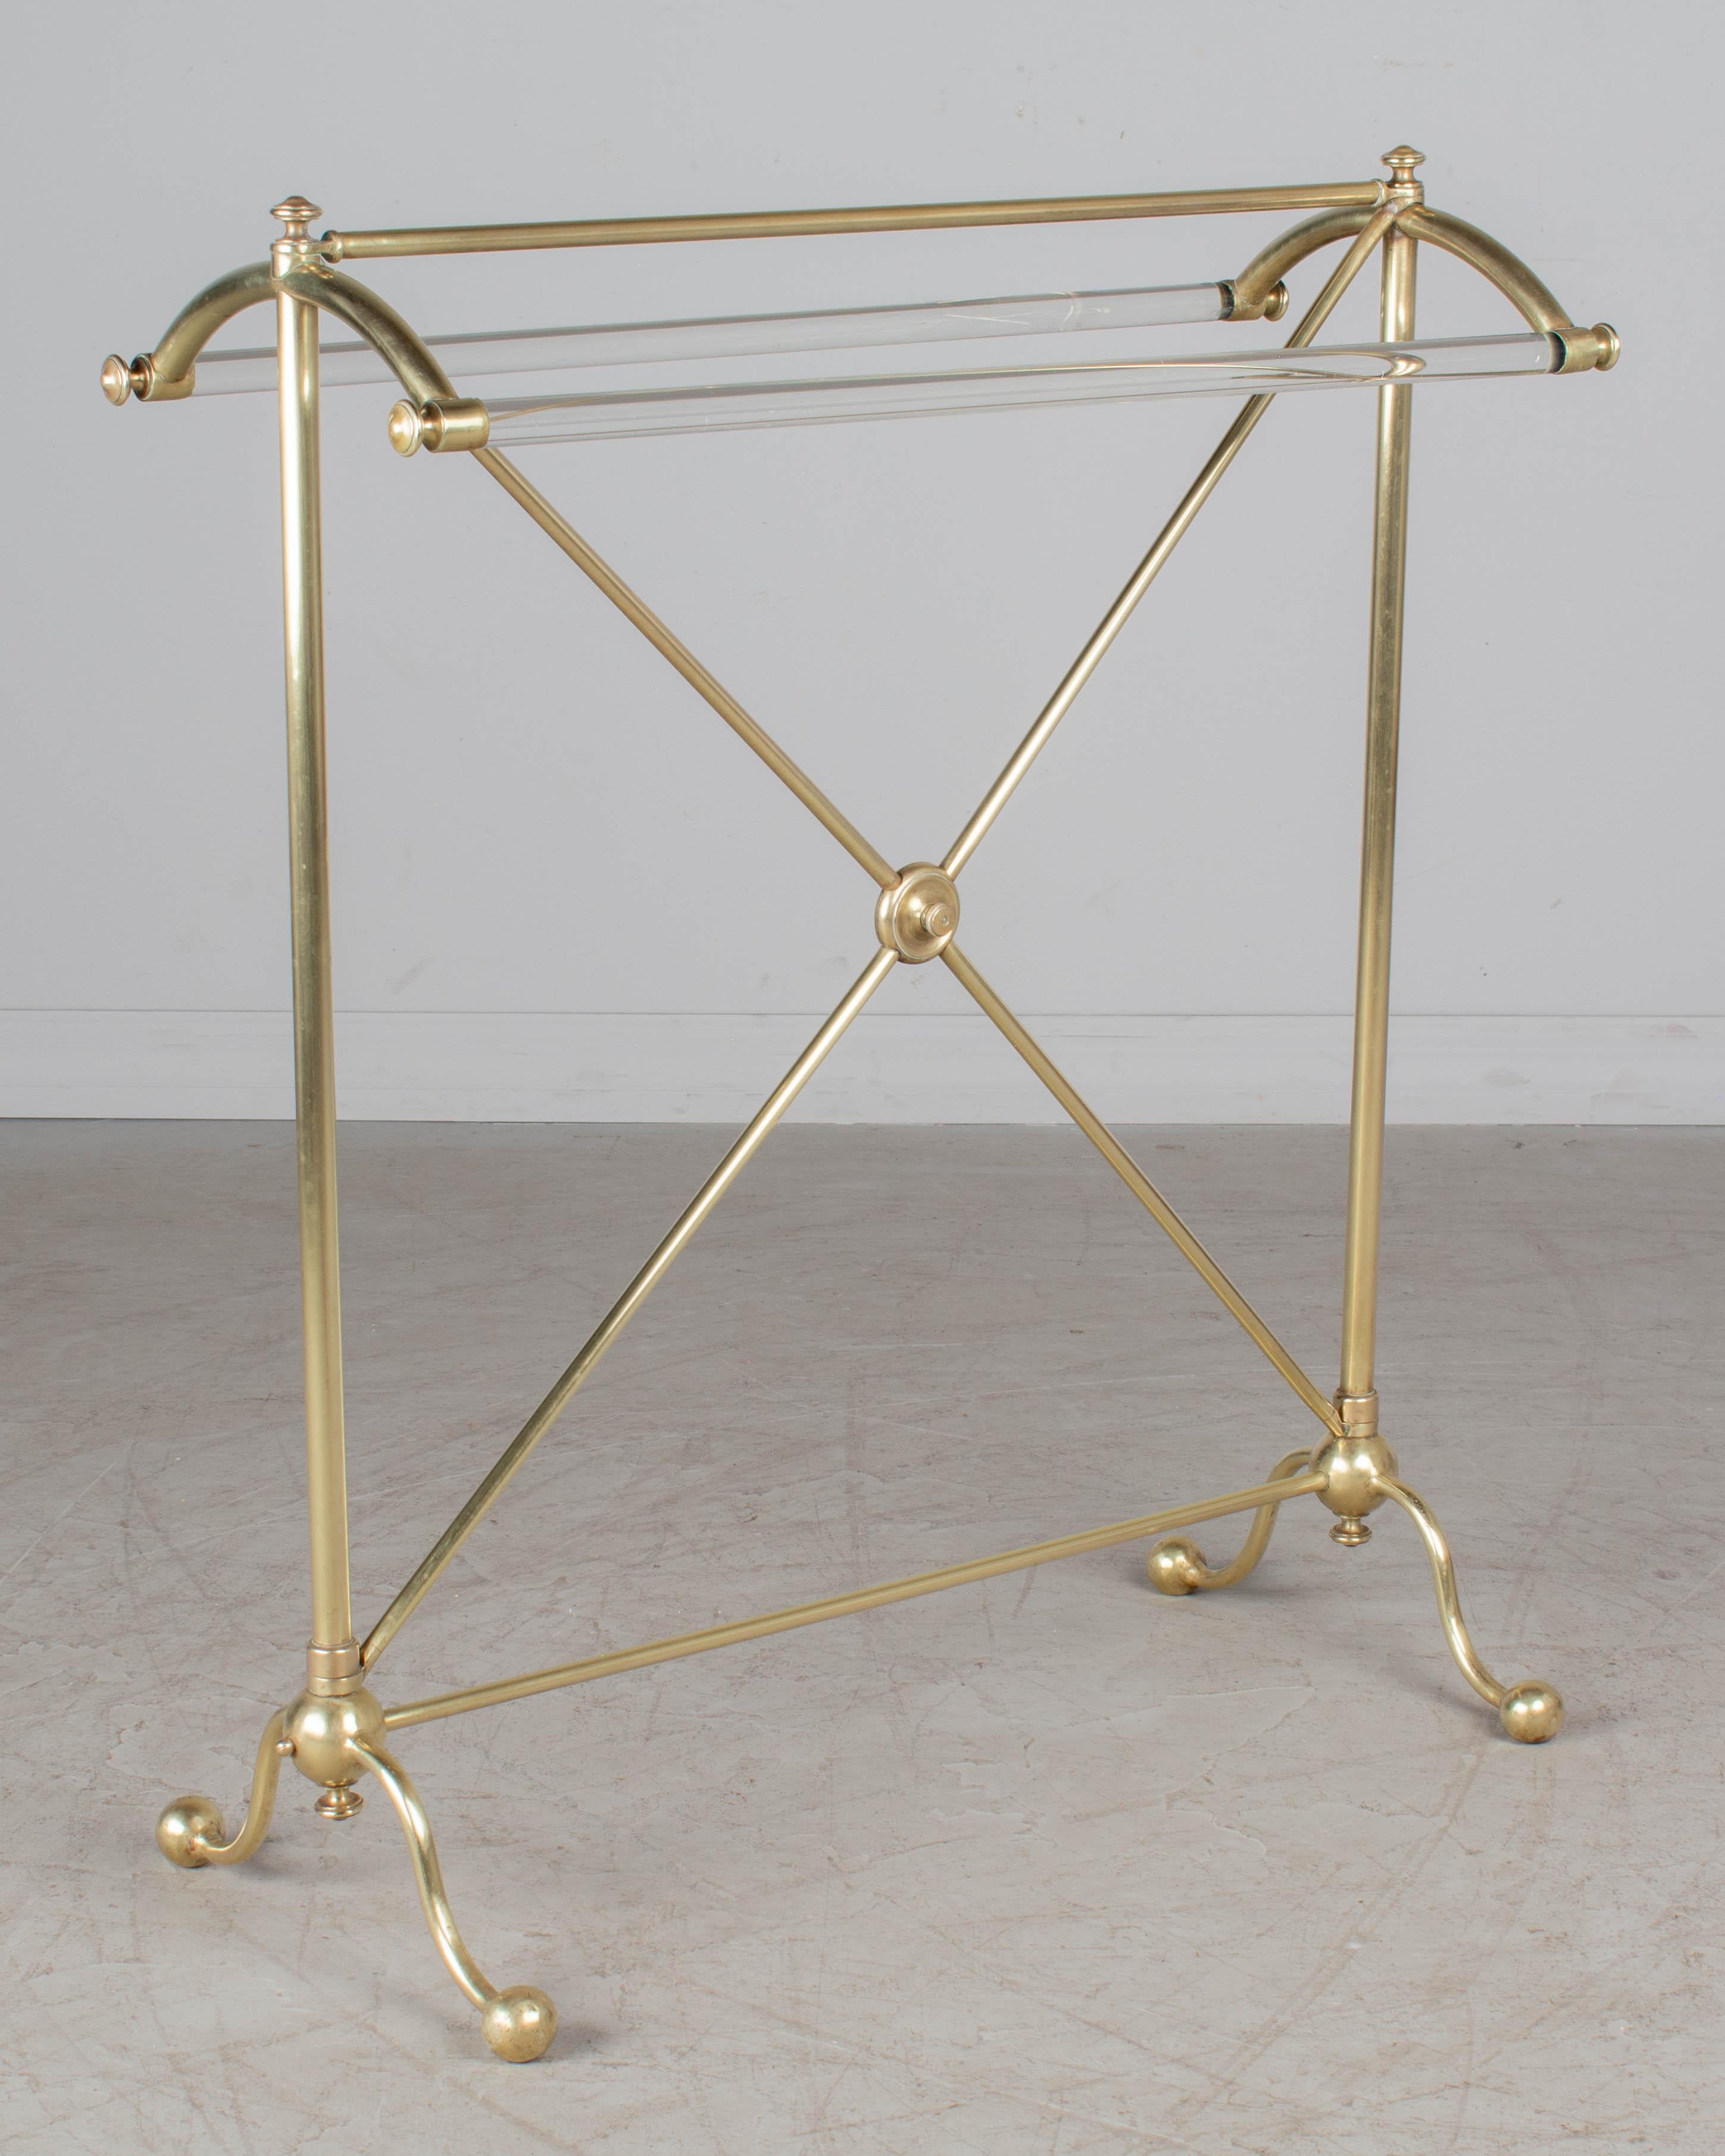 Cast 19th Century French Brass and Glass Towel Rail or Rack For Sale